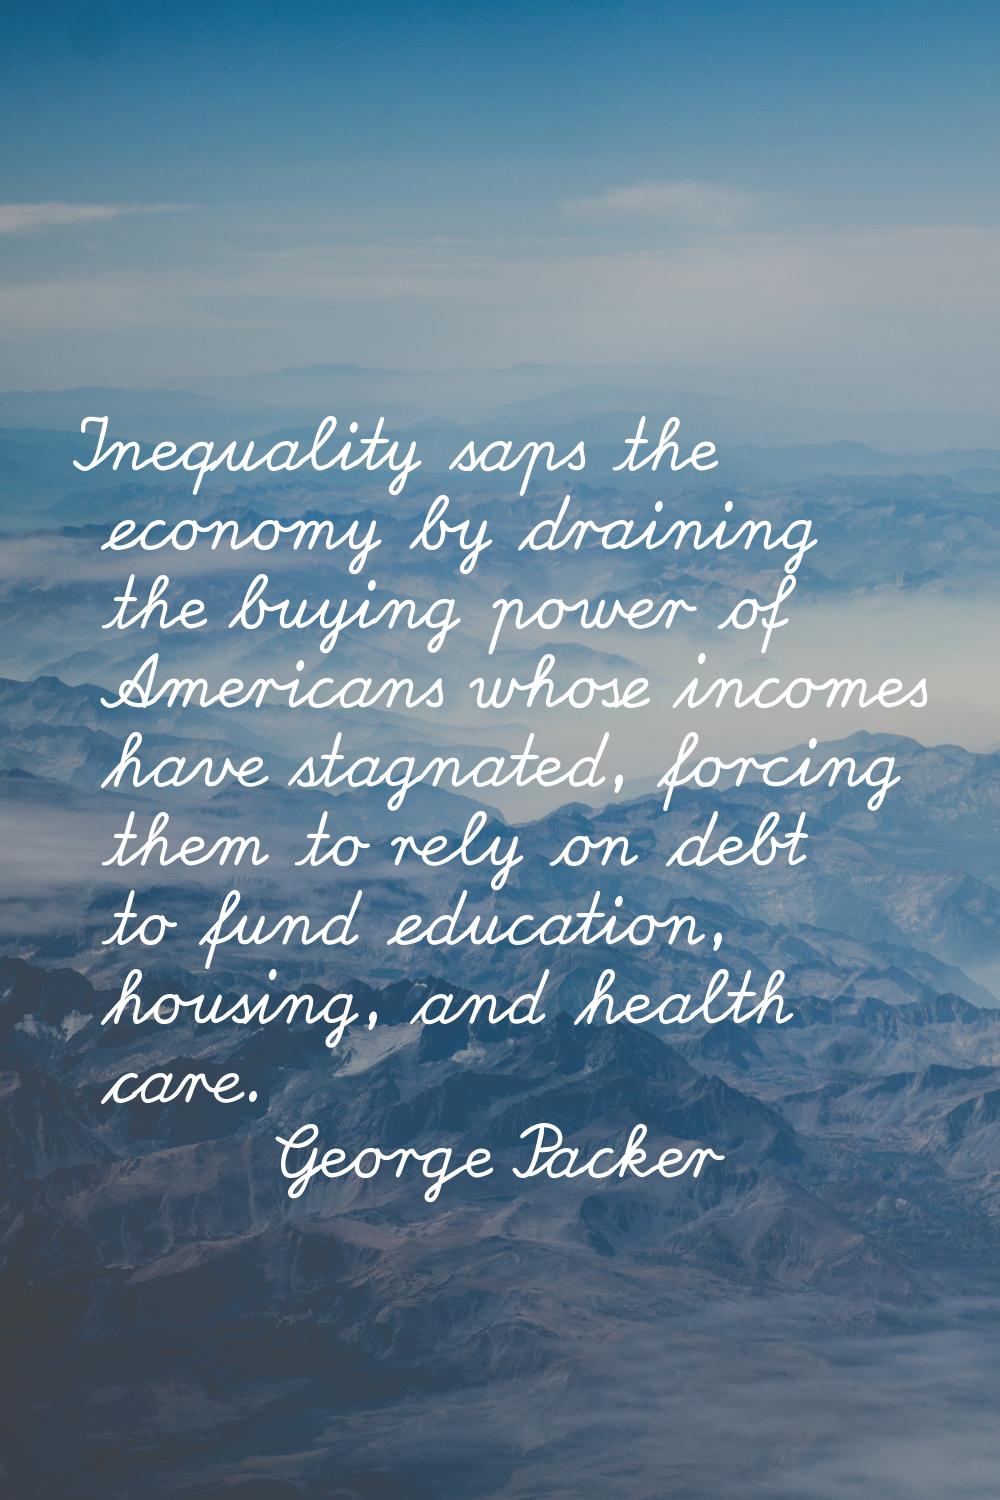 Inequality saps the economy by draining the buying power of Americans whose incomes have stagnated,